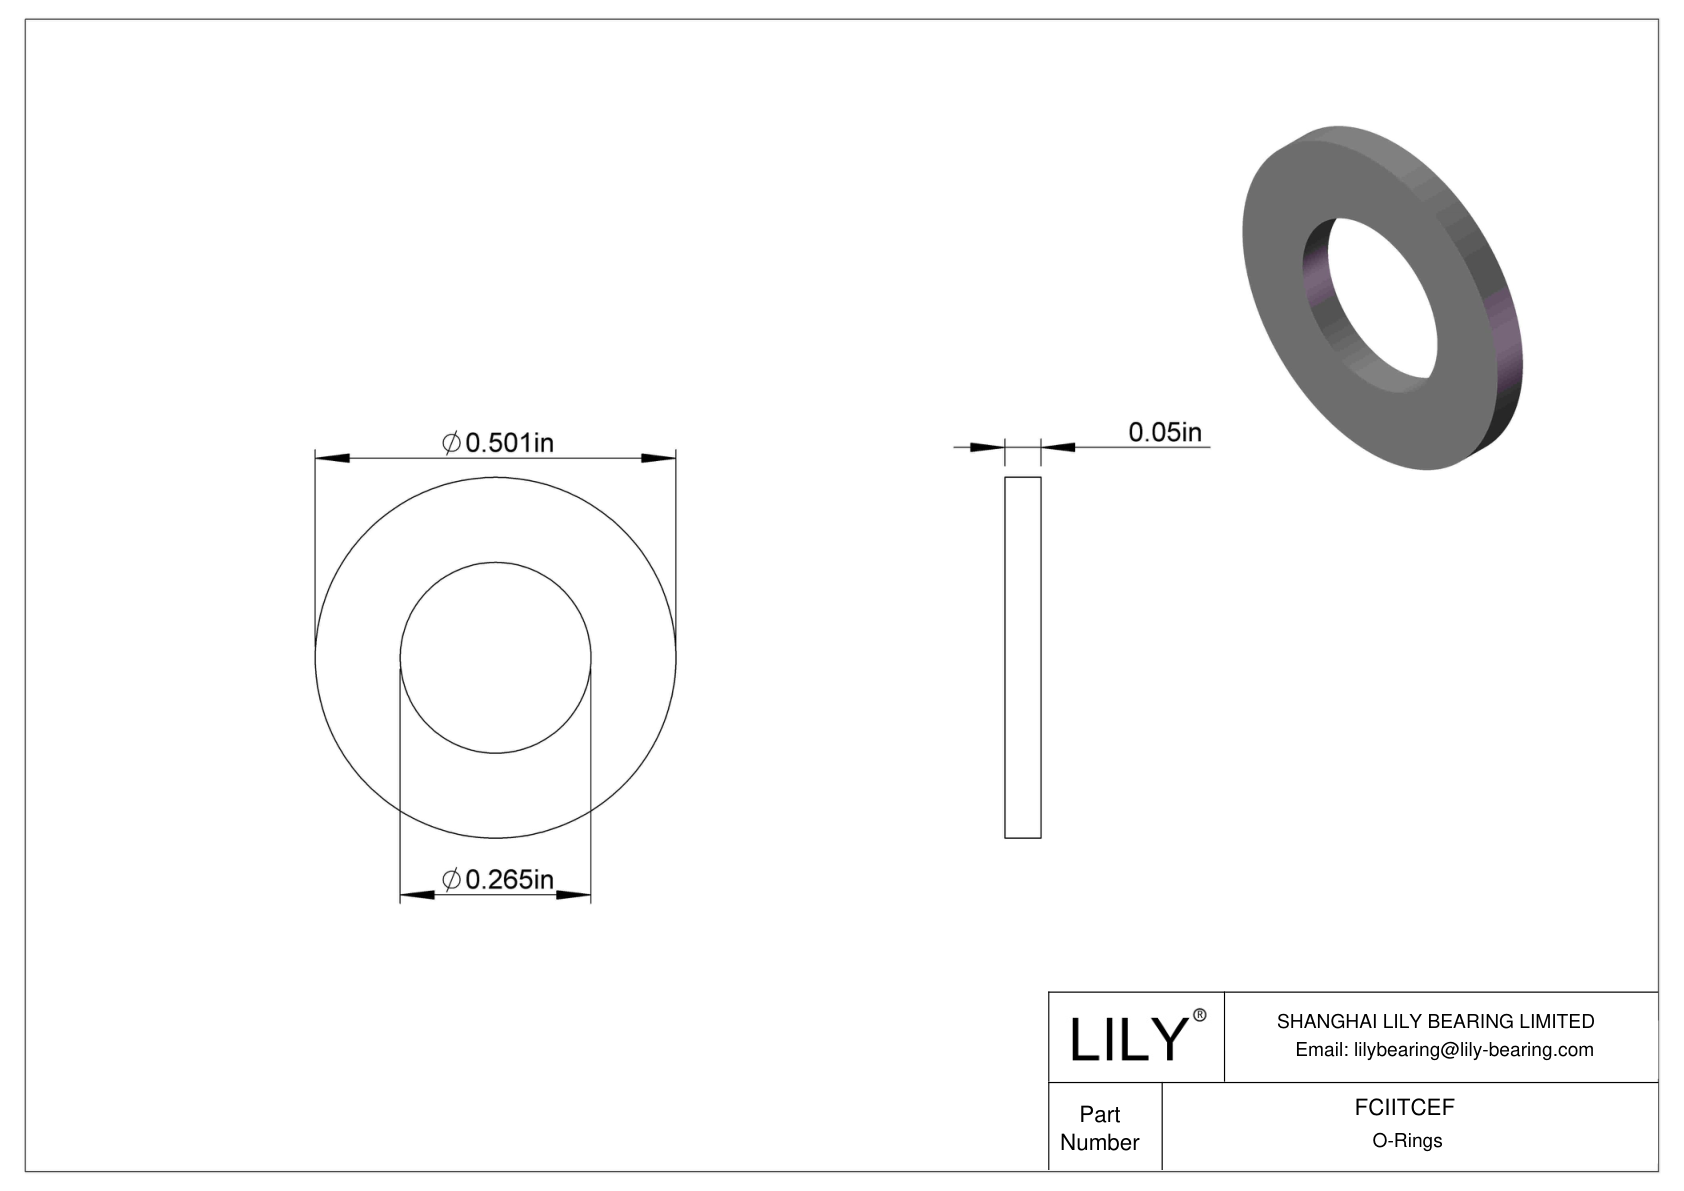 FCIITCEF O-Ring Backup Rings cad drawing